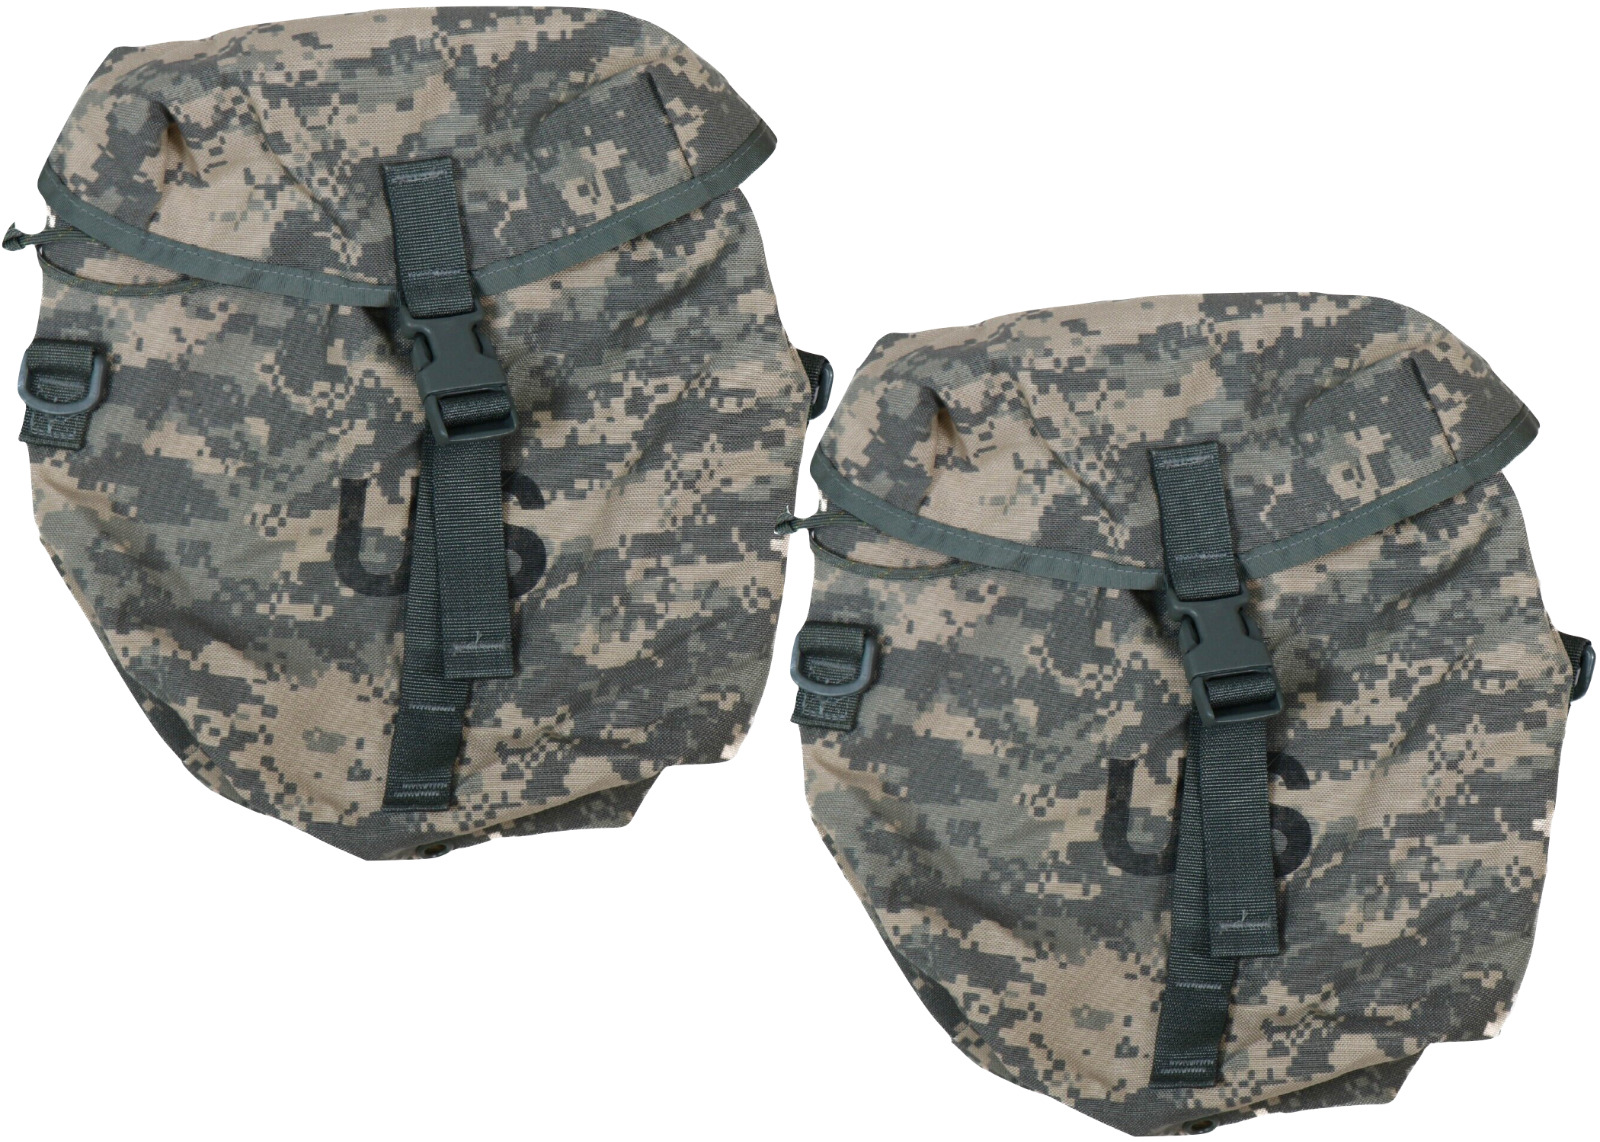 2 US Army Molle II Sustainment Pouch ACU UCP Dump Pouch Field Pack Digital Mag